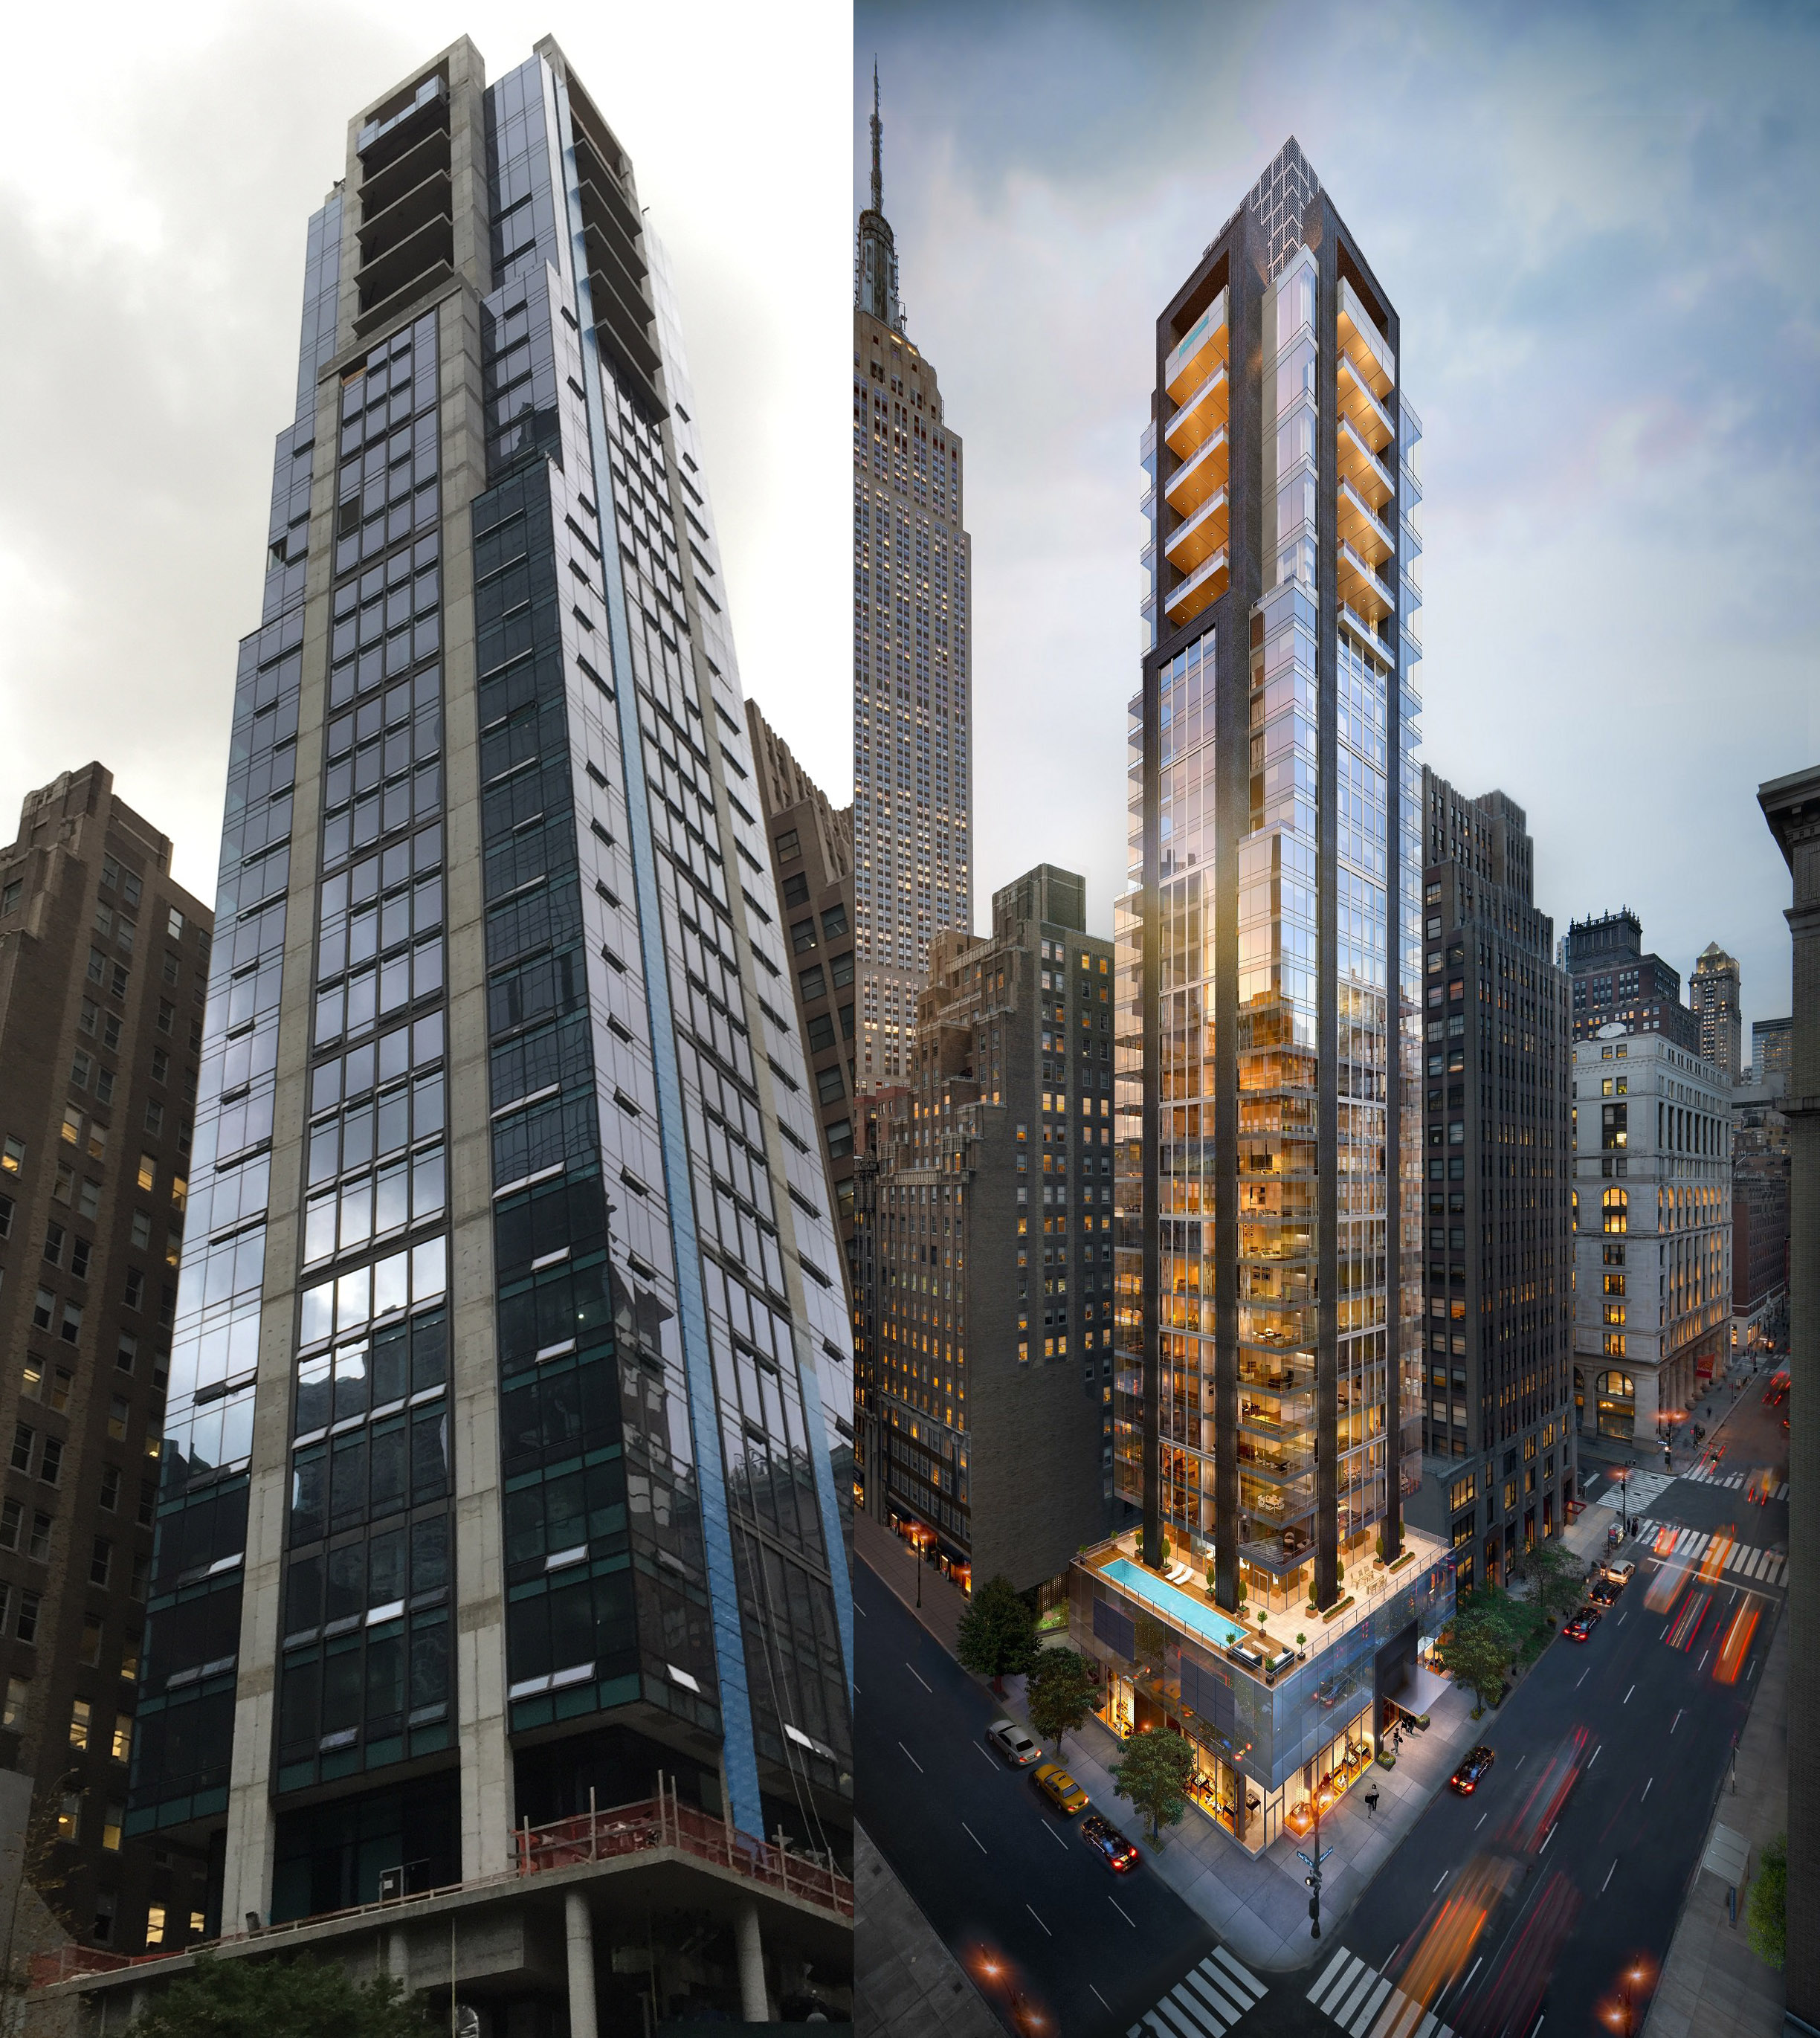 172 Madison Avenue, current photo and rendering. Photo by robertwalpole via YIMBY Forums